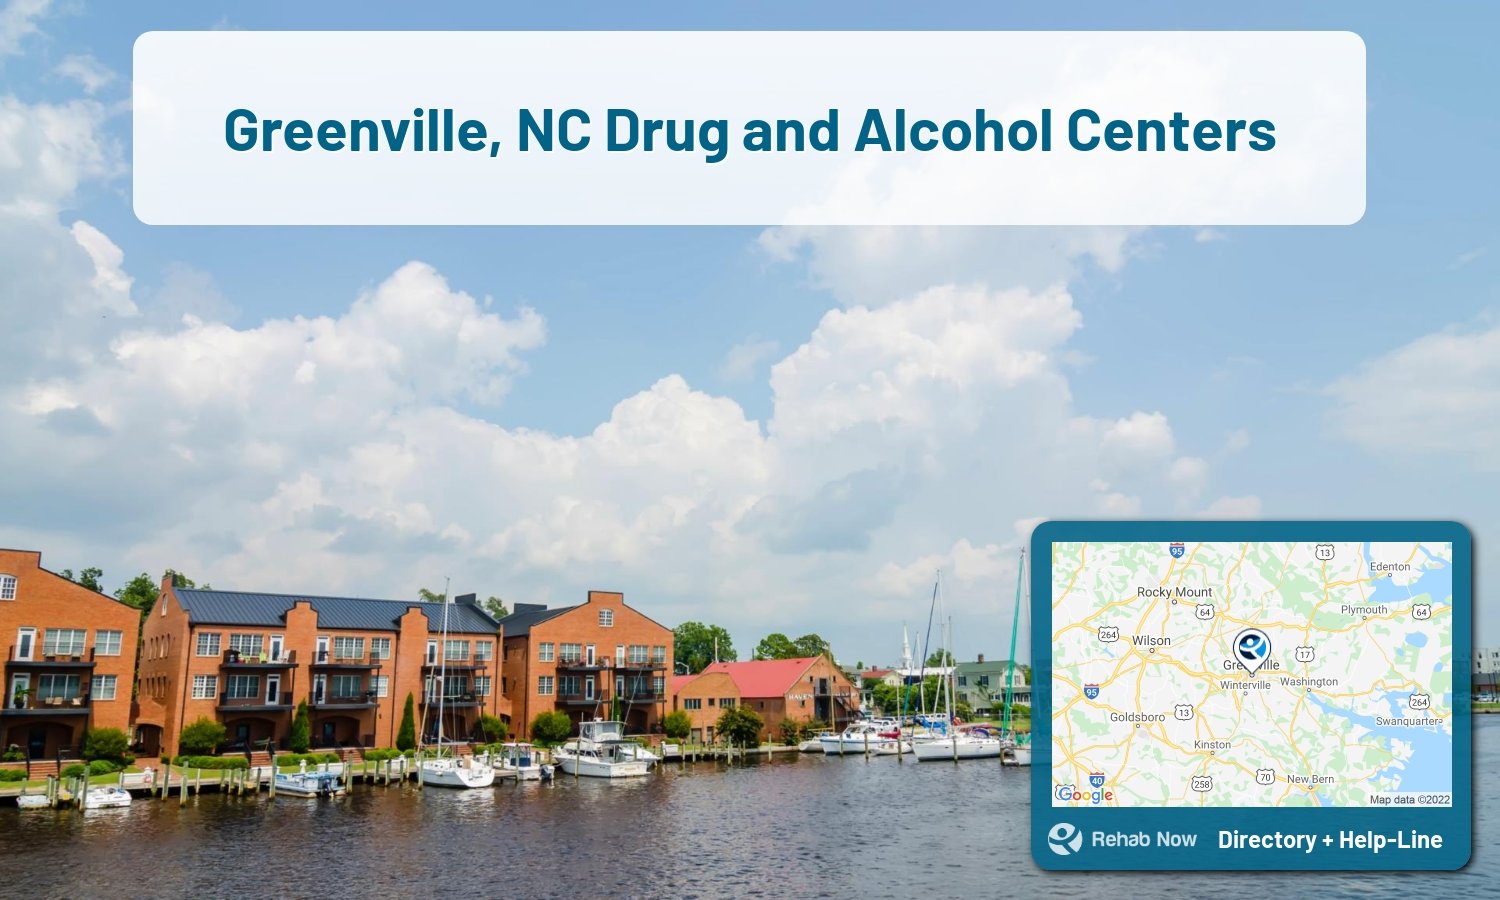 Ready to pick a rehab center in Greenville? Get off alcohol, opiates, and other drugs, by selecting top drug rehab centers in North Carolina